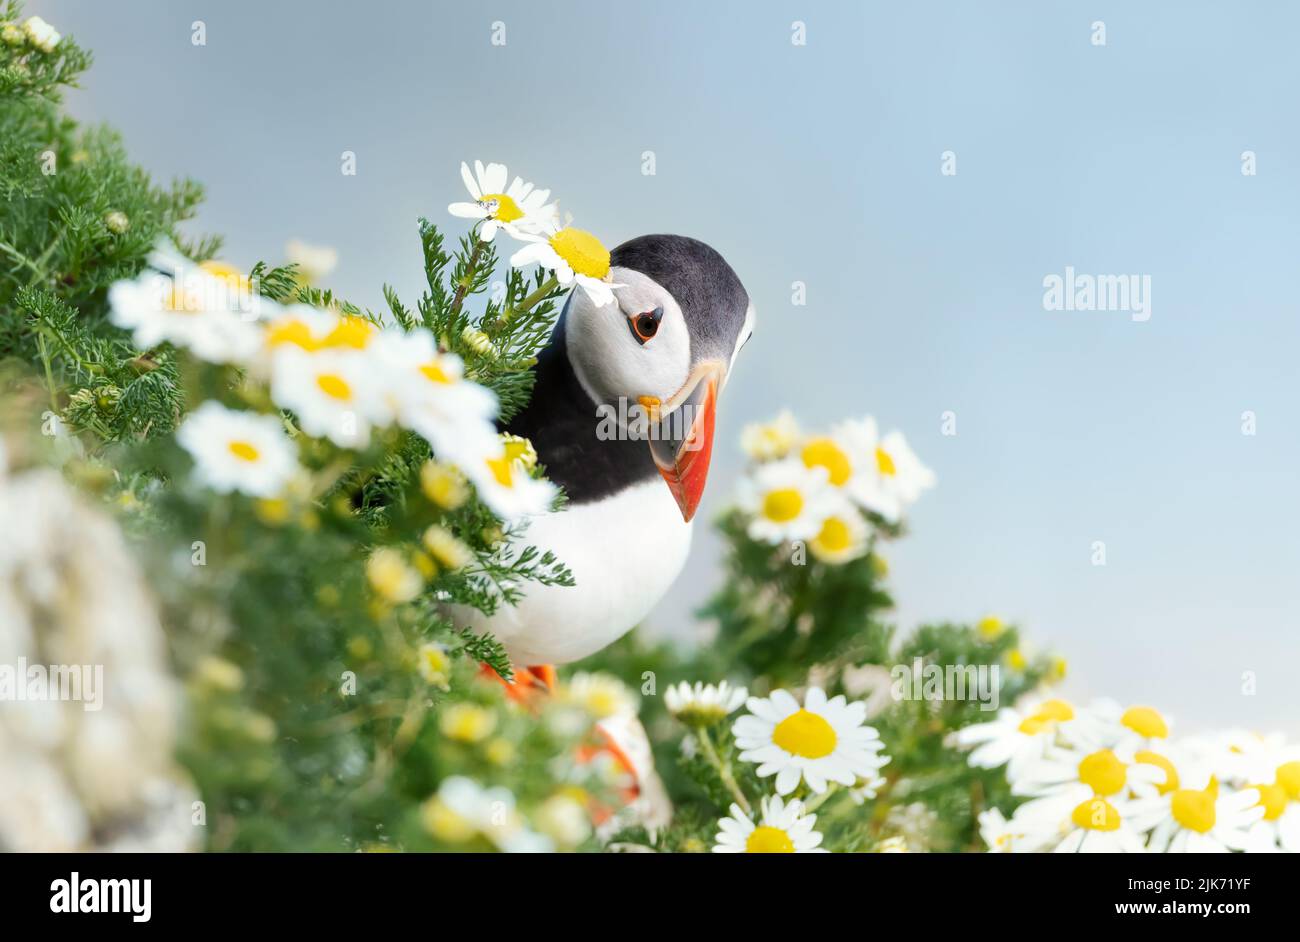 Portrait of an Atlantic puffin with daisies, Bempton cliffs, UK. Stock Photo